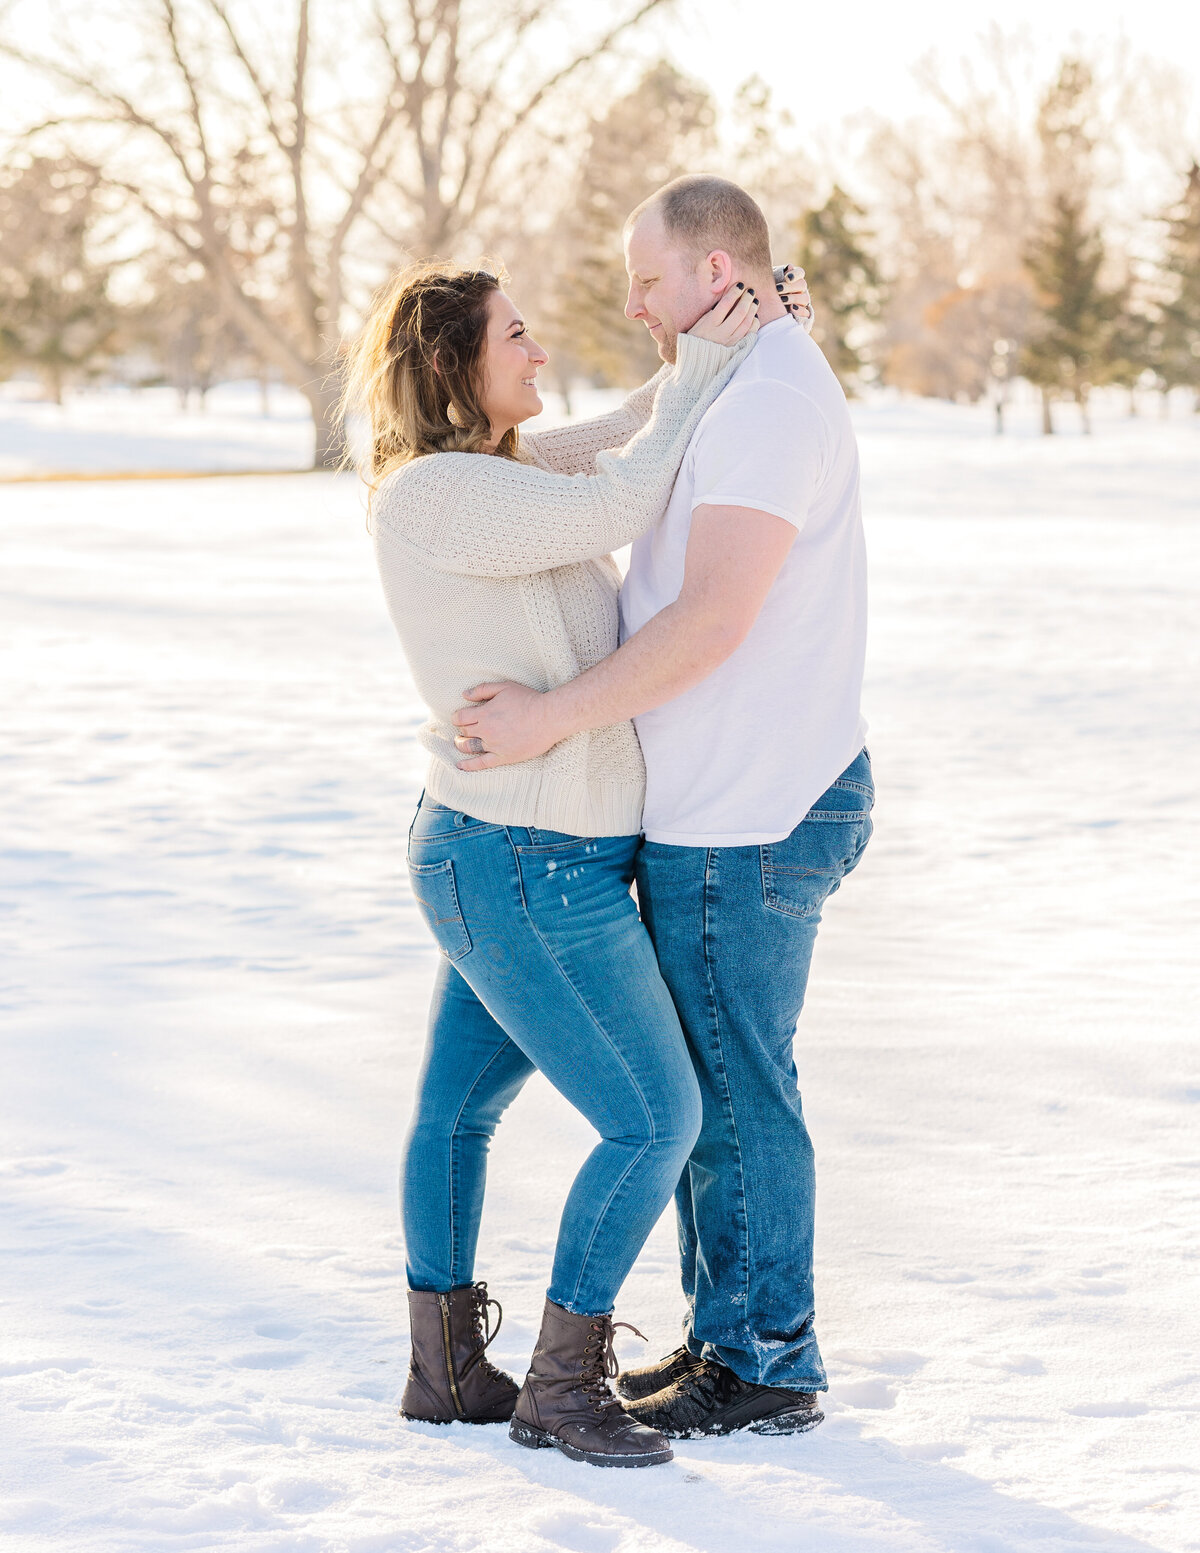 Colorado Springs Family Photographer - Couple embracing each other in the snow